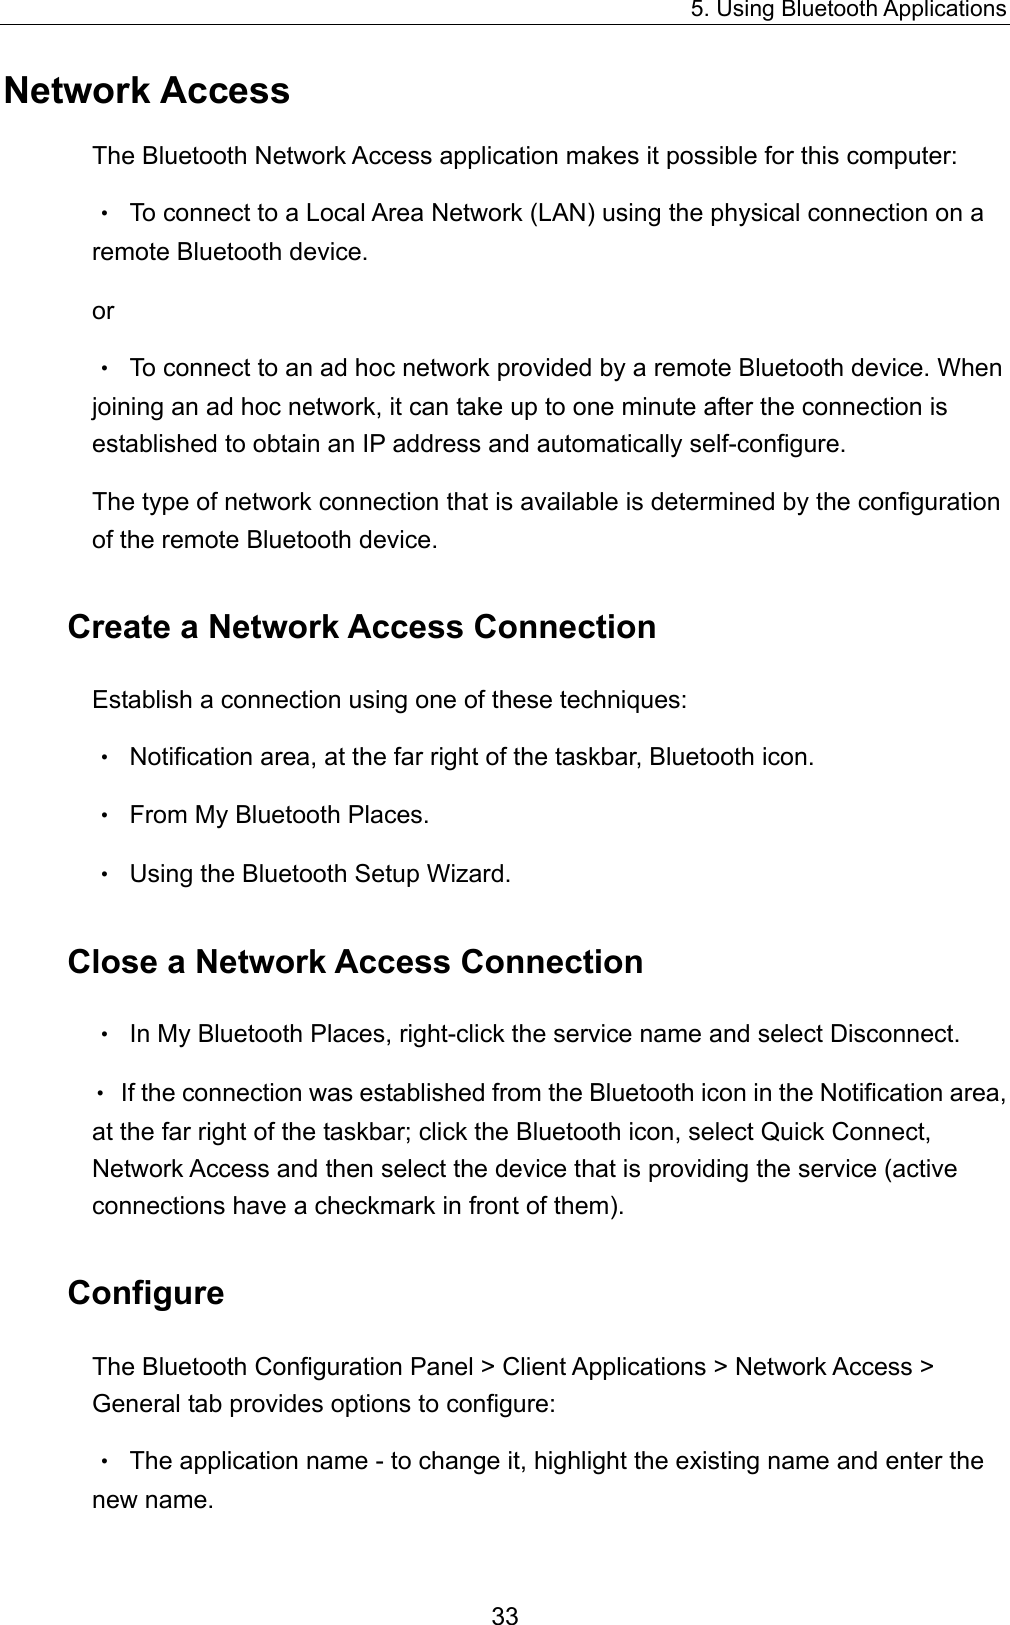 5. Using Bluetooth Applications 33 Network Access The Bluetooth Network Access application makes it possible for this computer: •  To connect to a Local Area Network (LAN) using the physical connection on a remote Bluetooth device. or •  To connect to an ad hoc network provided by a remote Bluetooth device. When joining an ad hoc network, it can take up to one minute after the connection is established to obtain an IP address and automatically self-configure. The type of network connection that is available is determined by the configuration of the remote Bluetooth device. Create a Network Access Connection Establish a connection using one of these techniques: •  Notification area, at the far right of the taskbar, Bluetooth icon. •  From My Bluetooth Places. •  Using the Bluetooth Setup Wizard. Close a Network Access Connection •  In My Bluetooth Places, right-click the service name and select Disconnect. •  If the connection was established from the Bluetooth icon in the Notification area, at the far right of the taskbar; click the Bluetooth icon, select Quick Connect, Network Access and then select the device that is providing the service (active connections have a checkmark in front of them). Configure The Bluetooth Configuration Panel &gt; Client Applications &gt; Network Access &gt; General tab provides options to configure: •  The application name - to change it, highlight the existing name and enter the new name. 